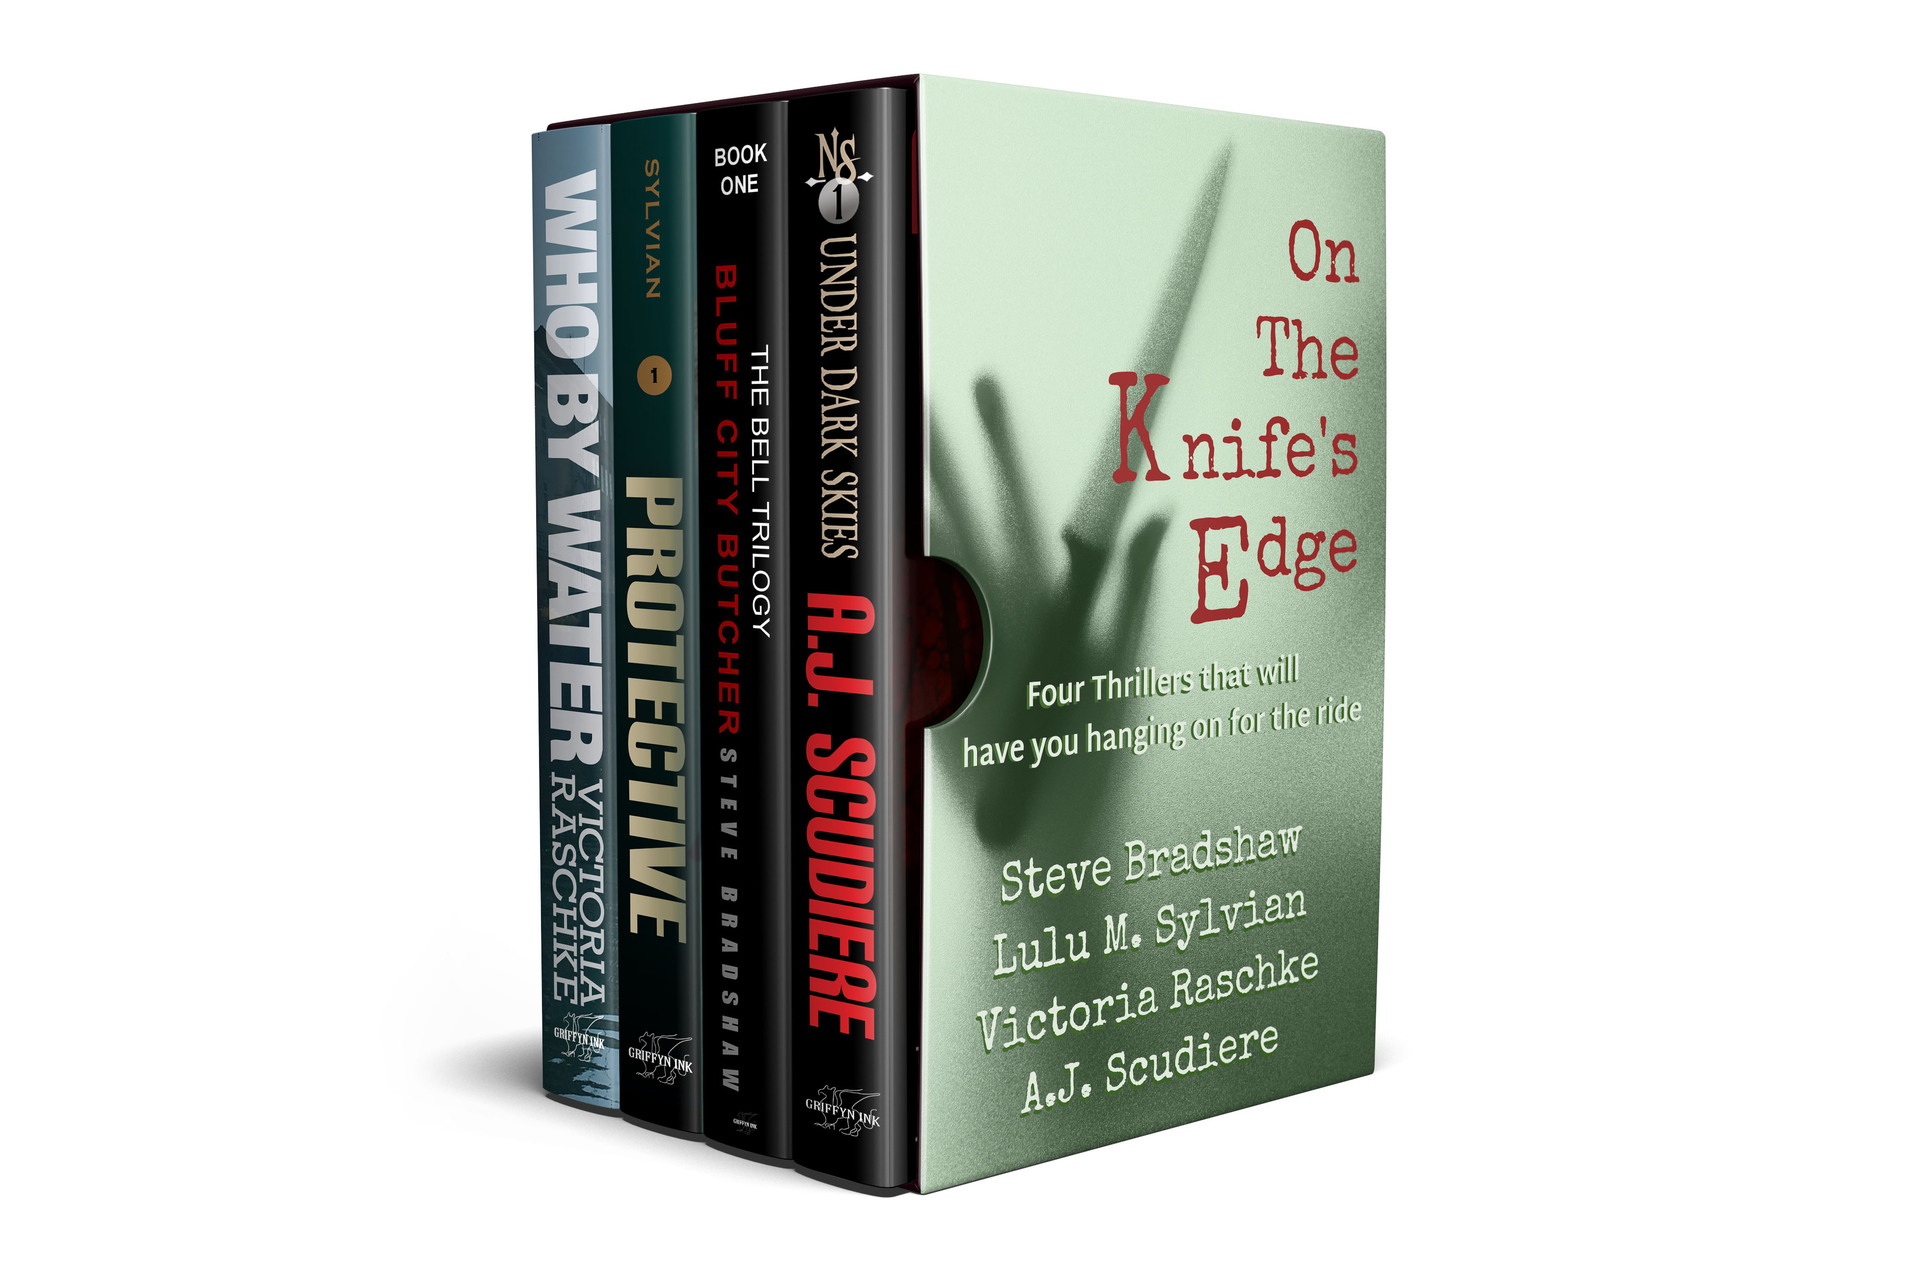 On the Knife's Edge - Four Novels to Keep You on the Edge of Your Seat